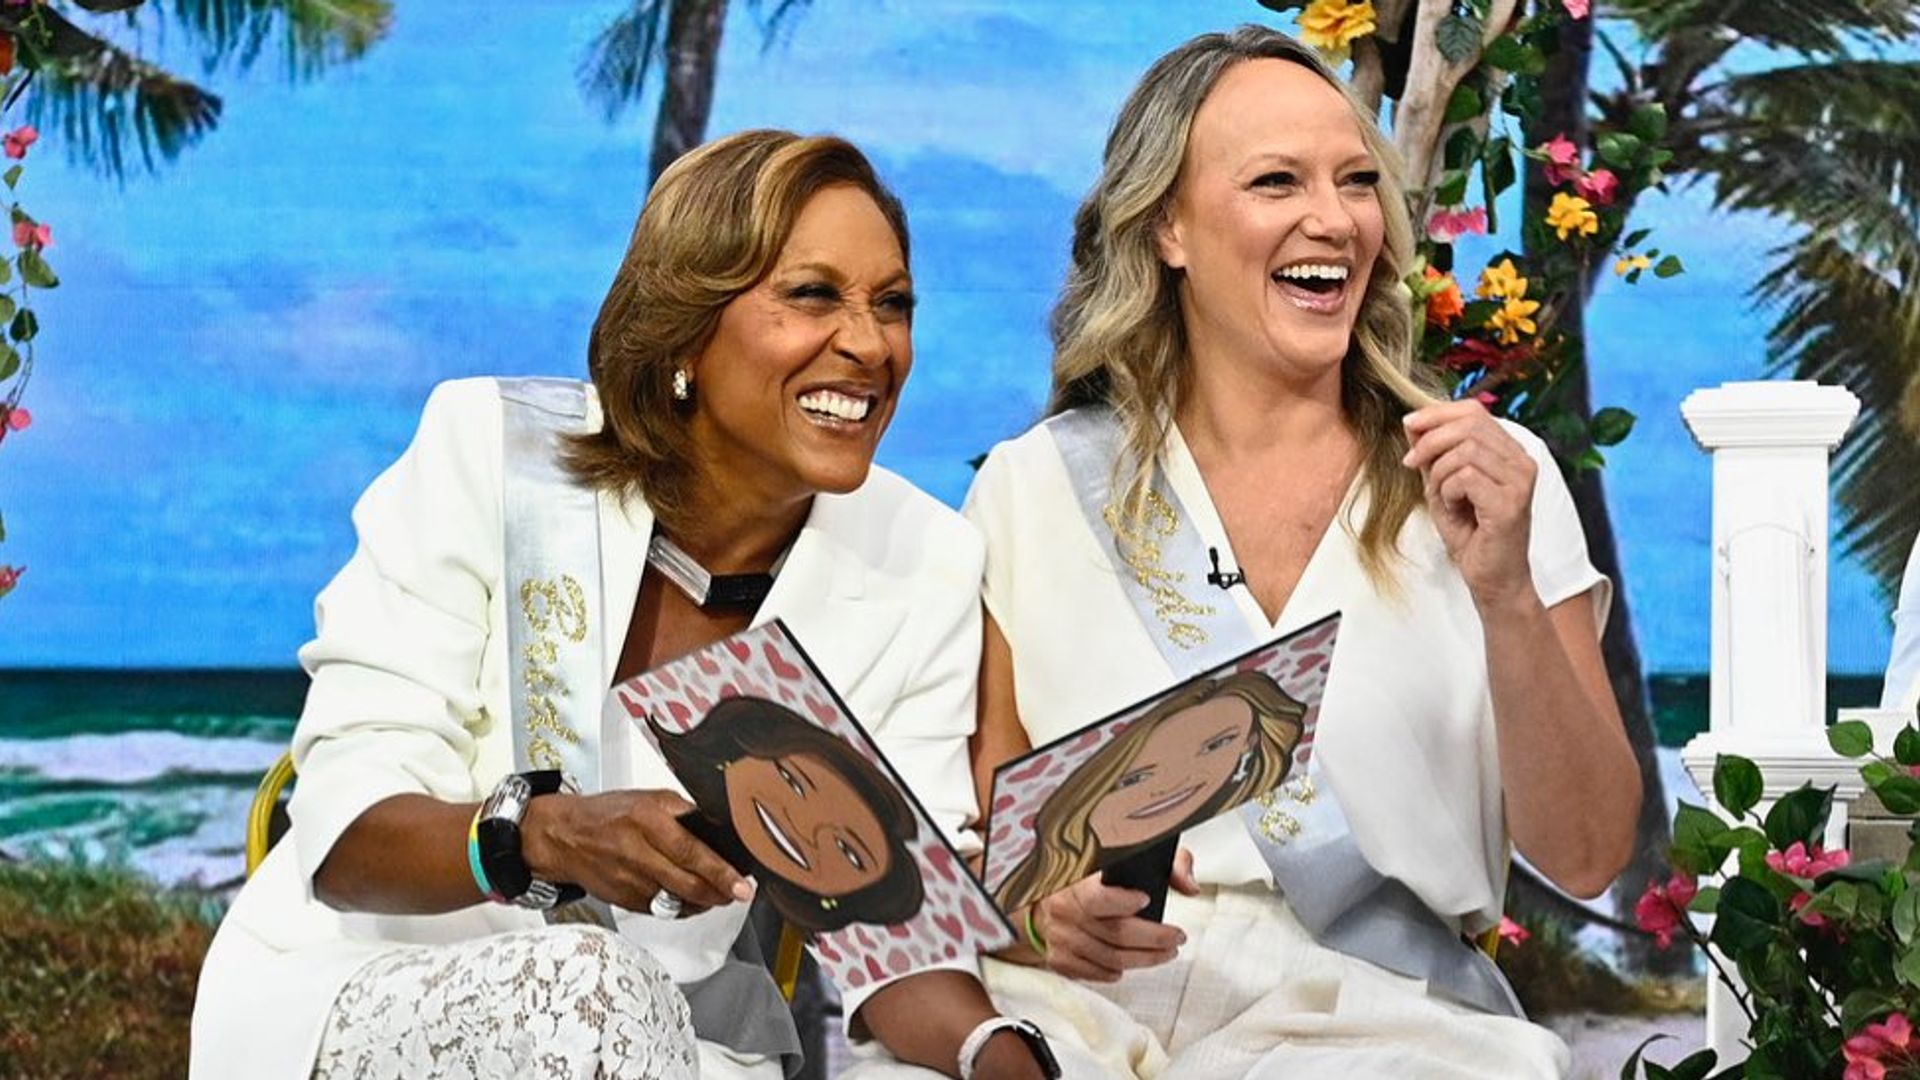 Robin Roberts and Amber Laign during their Good Morning America bachelorette party